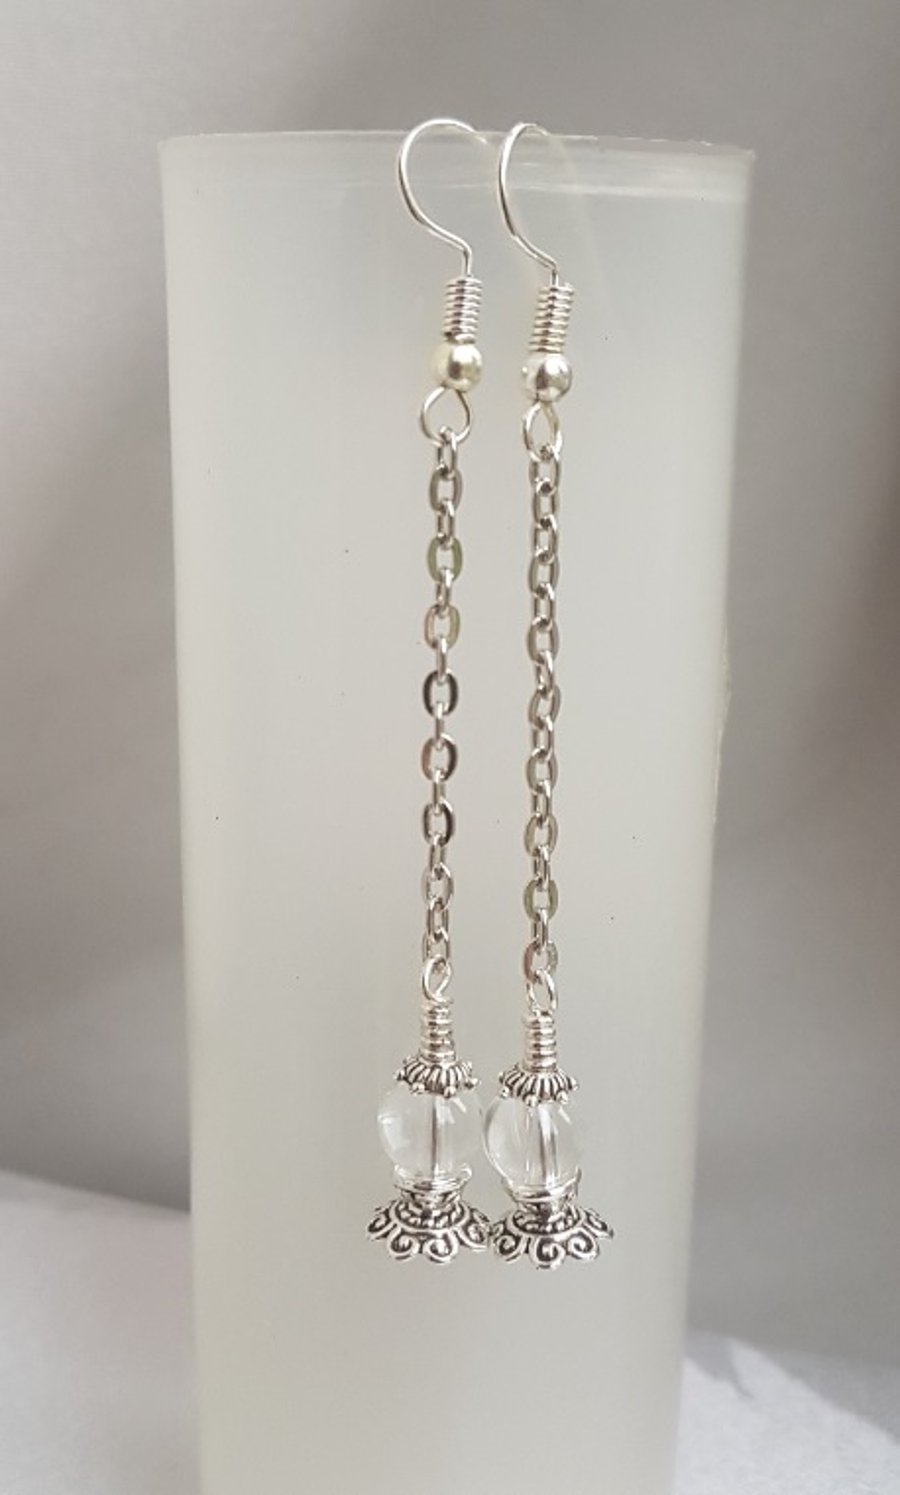 Gorgeous Tiny Crystal Ball Dangly Earrings - Silver Tones.